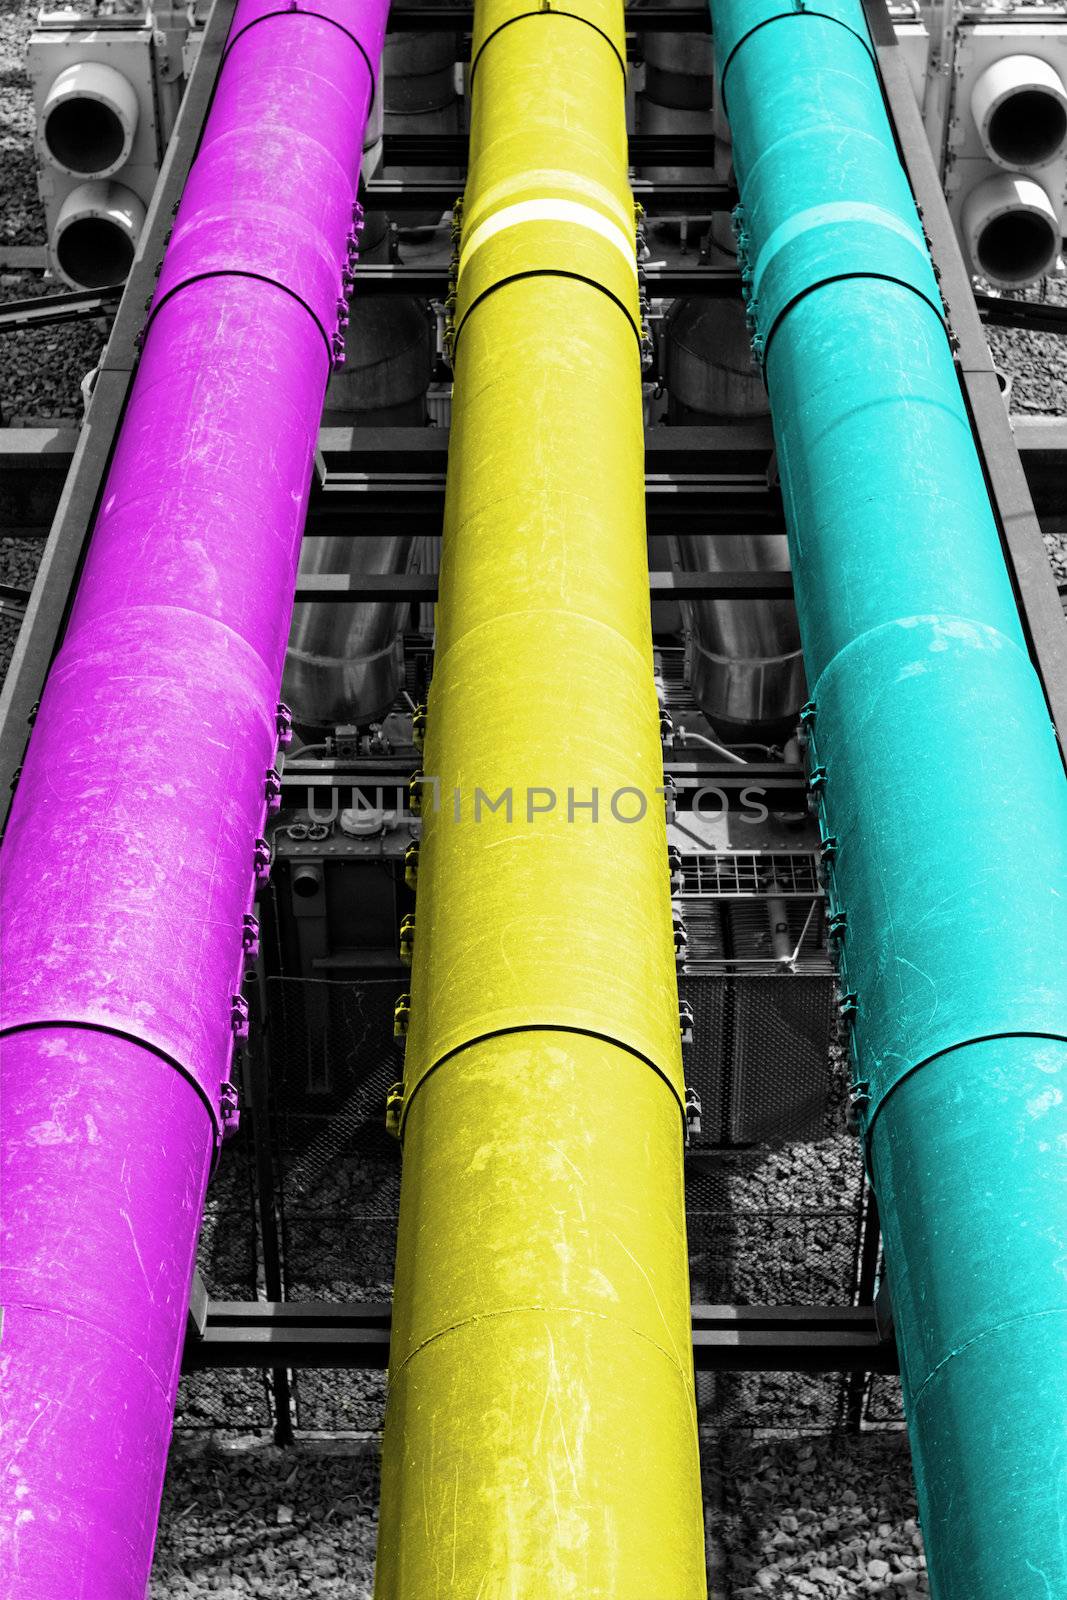 industrial pipes in a electricity power plant (CMY colors)